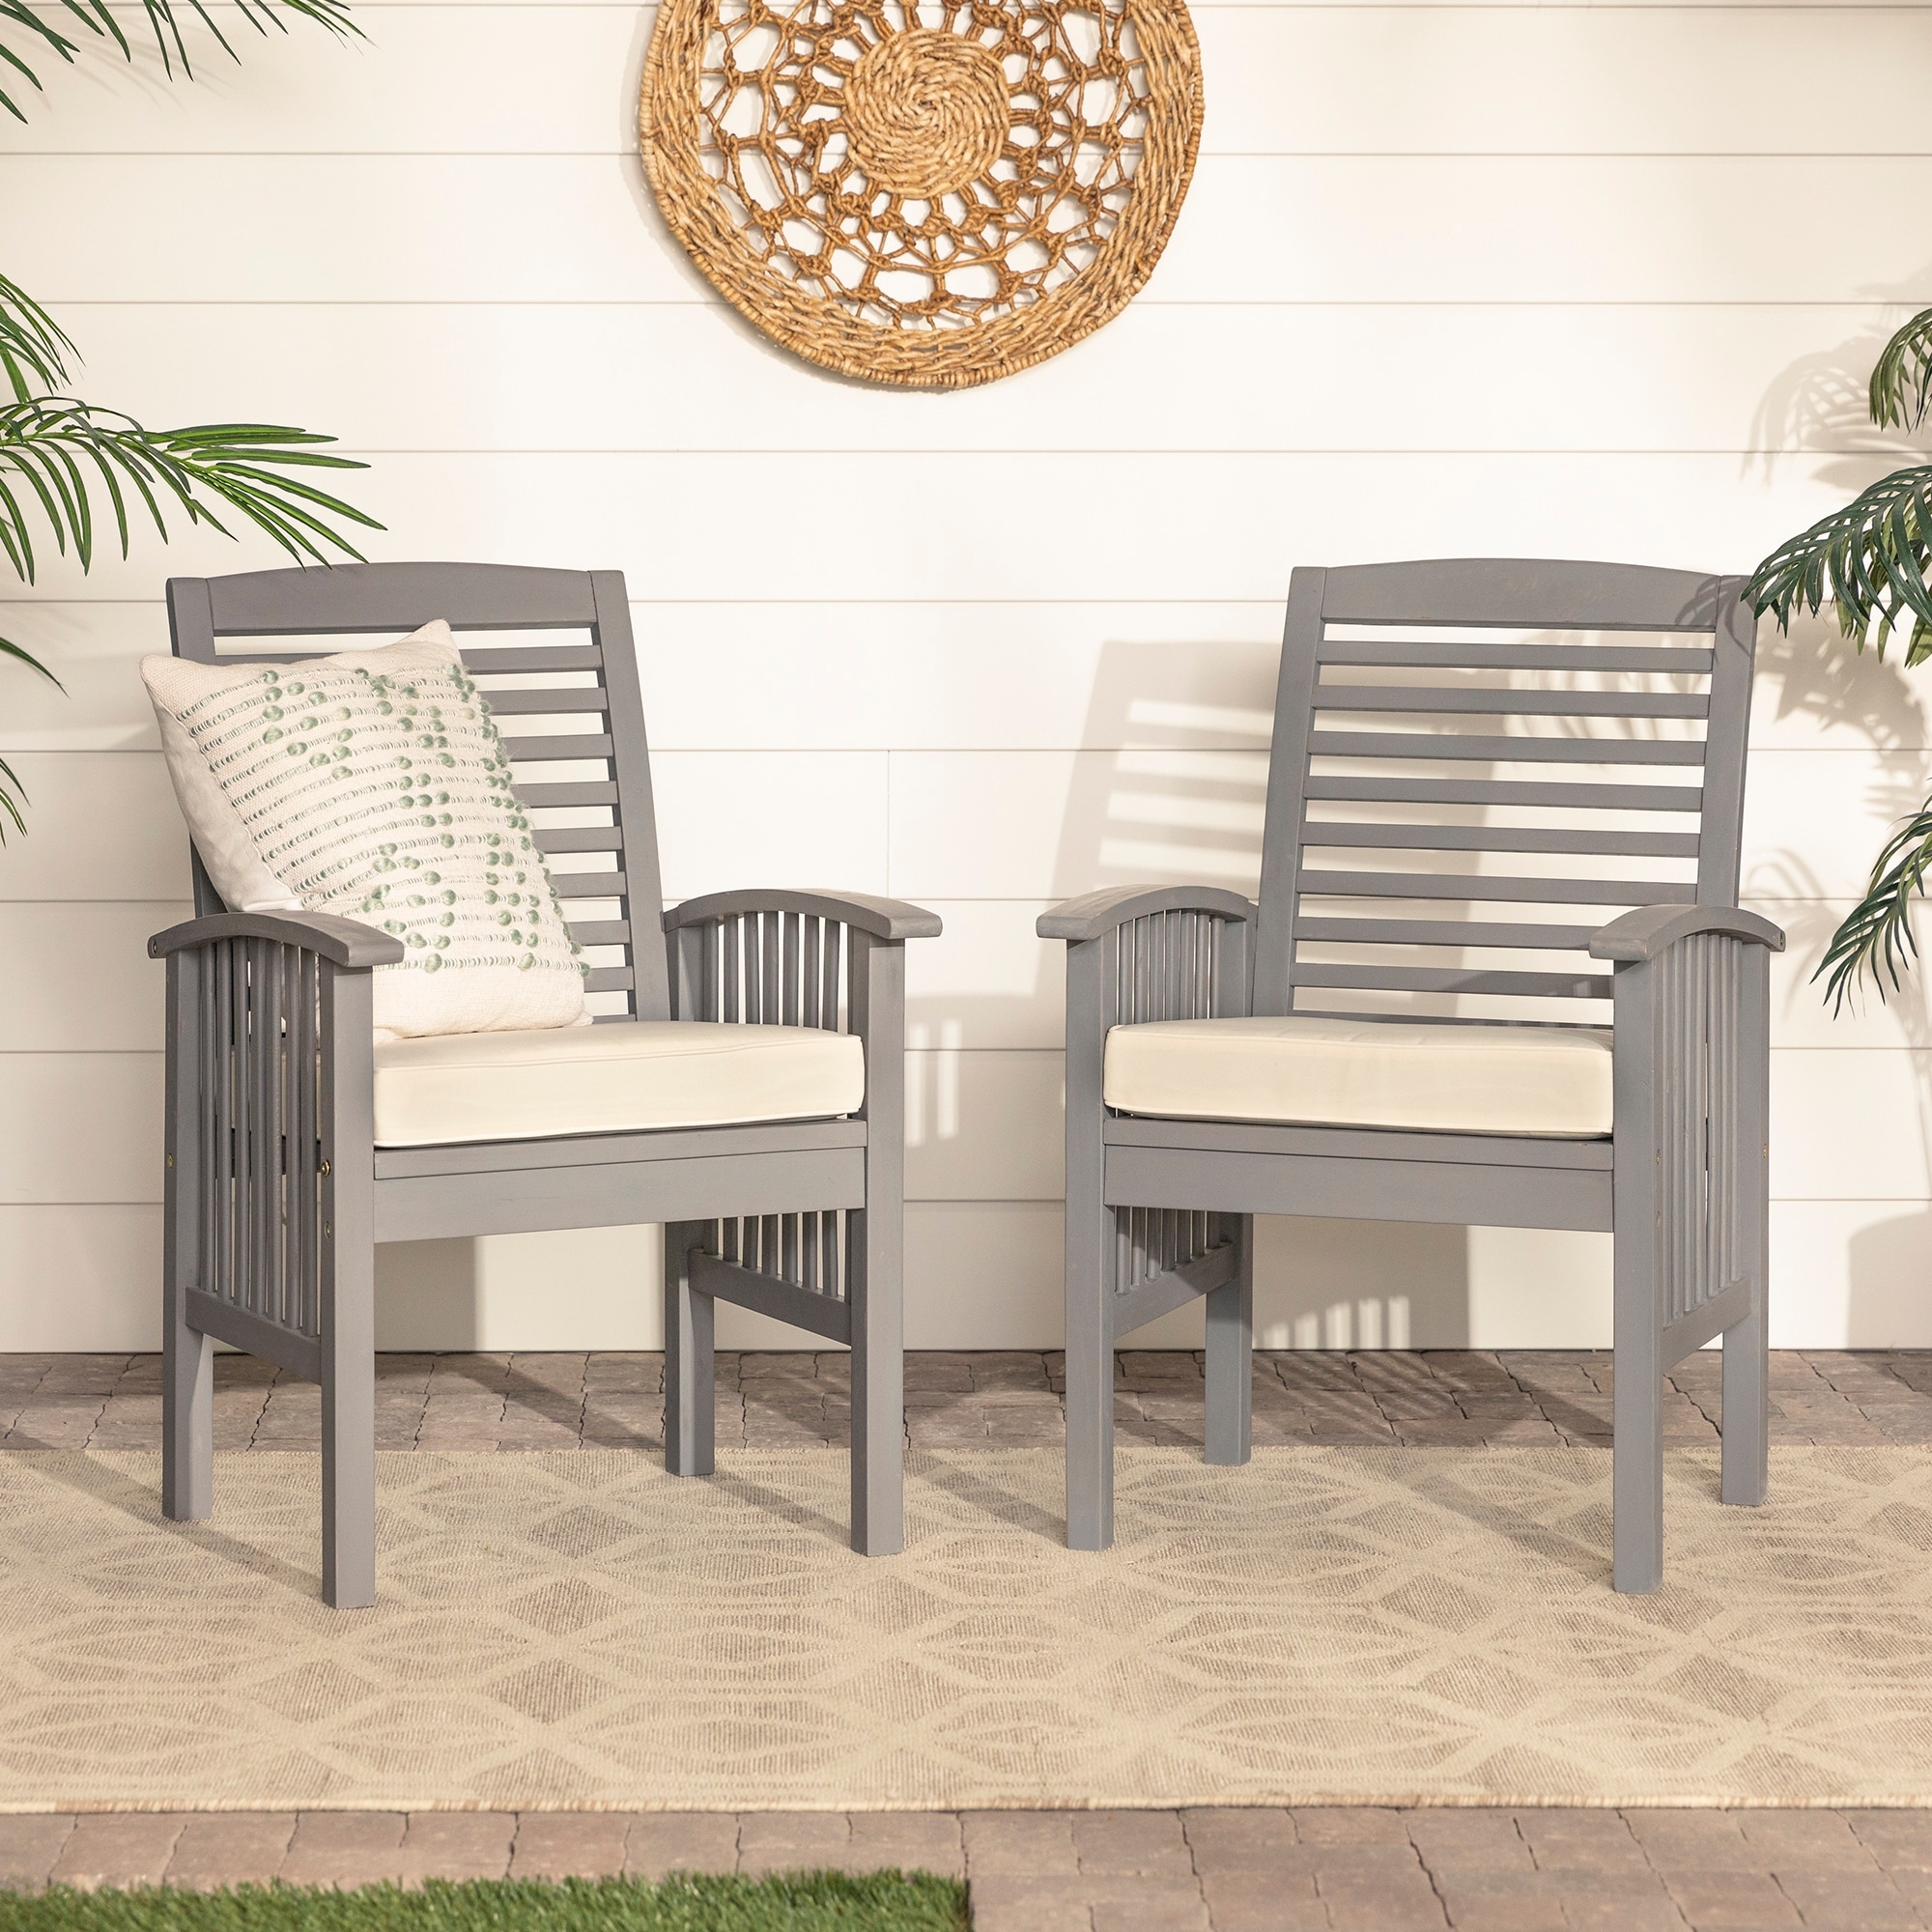 Middlebrook Surfside Acacia Wood Outdoor Chairs  Set Of 2